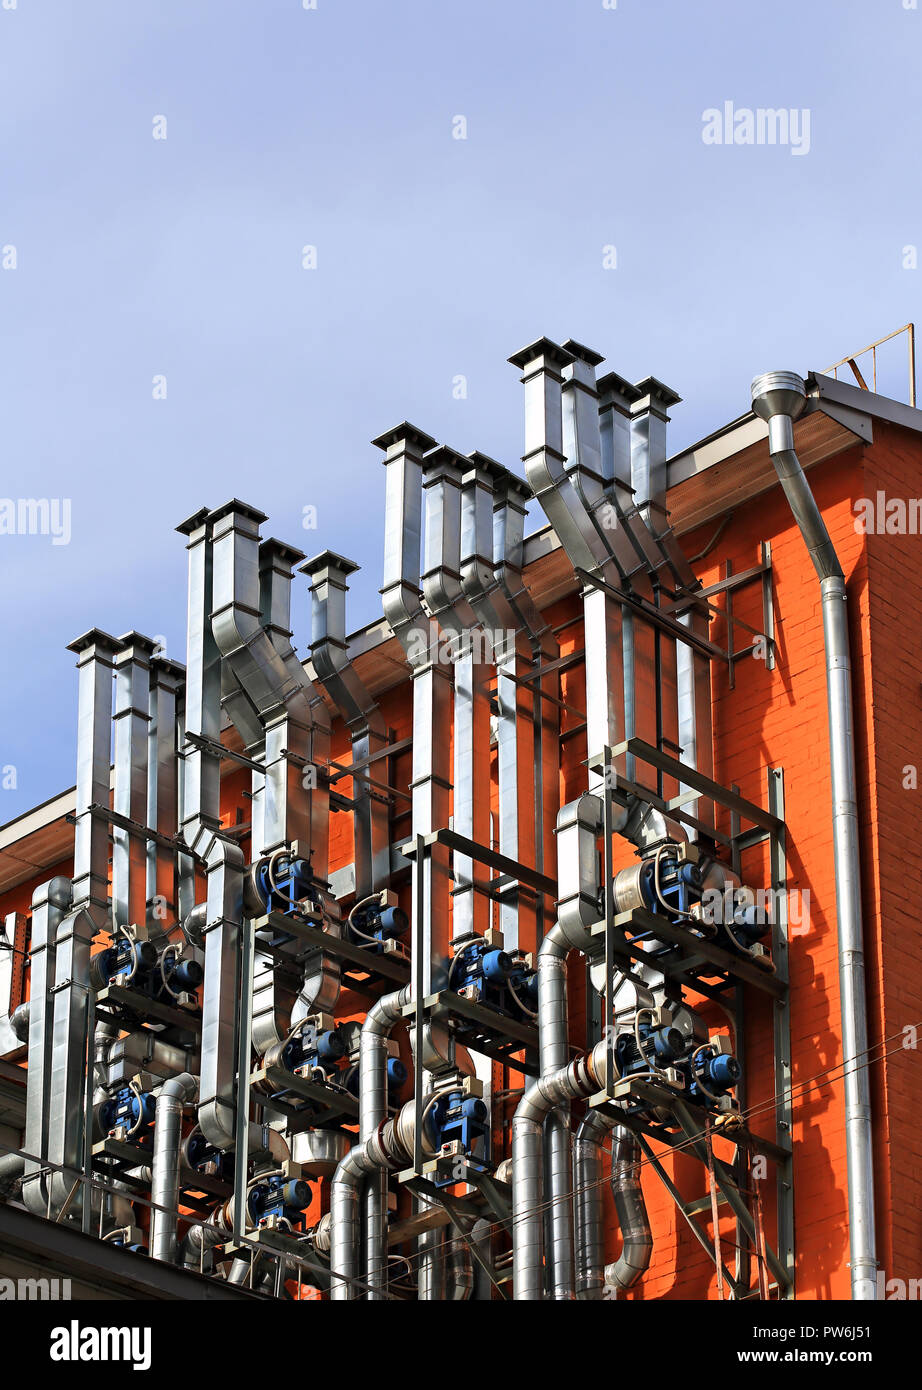 Ventilation pipes and actuators on the wall of an industrial building Stock Photo